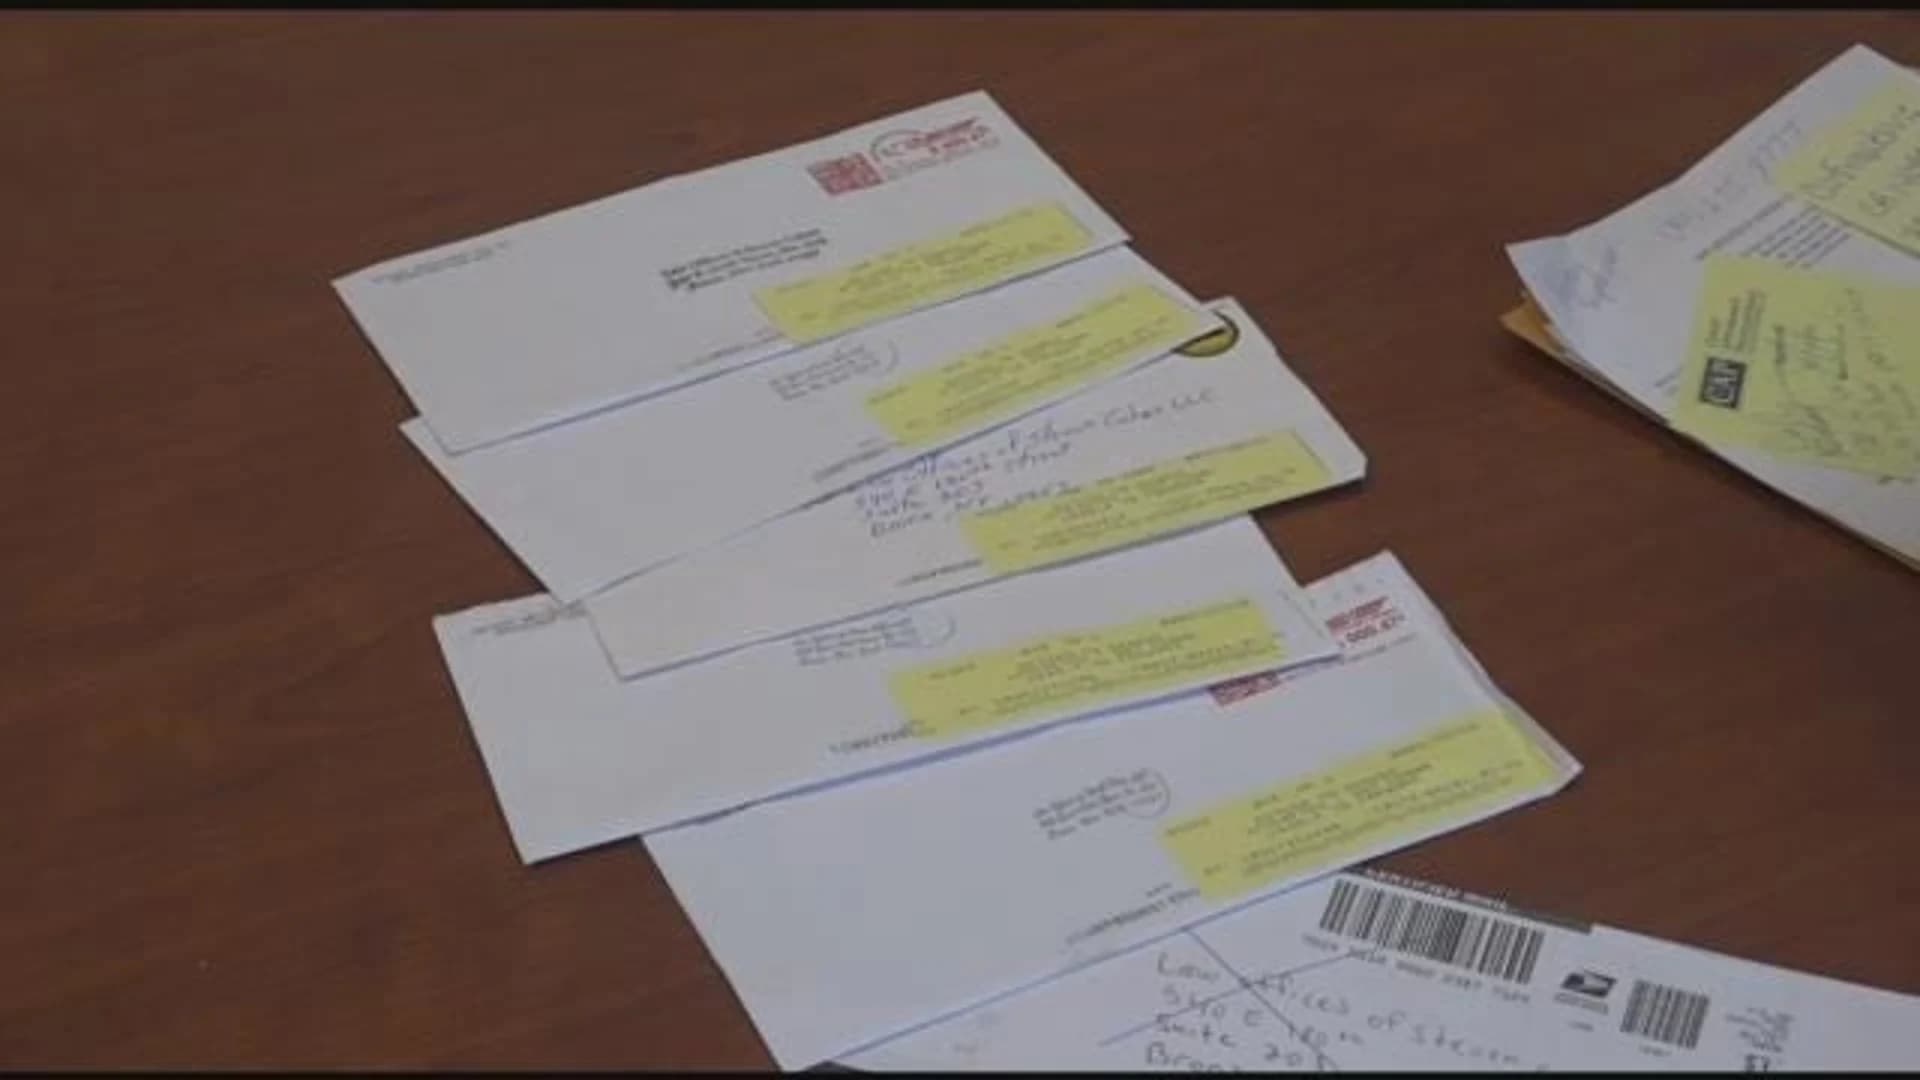 Law office: Mail carrier doesn't have time to deliver to address